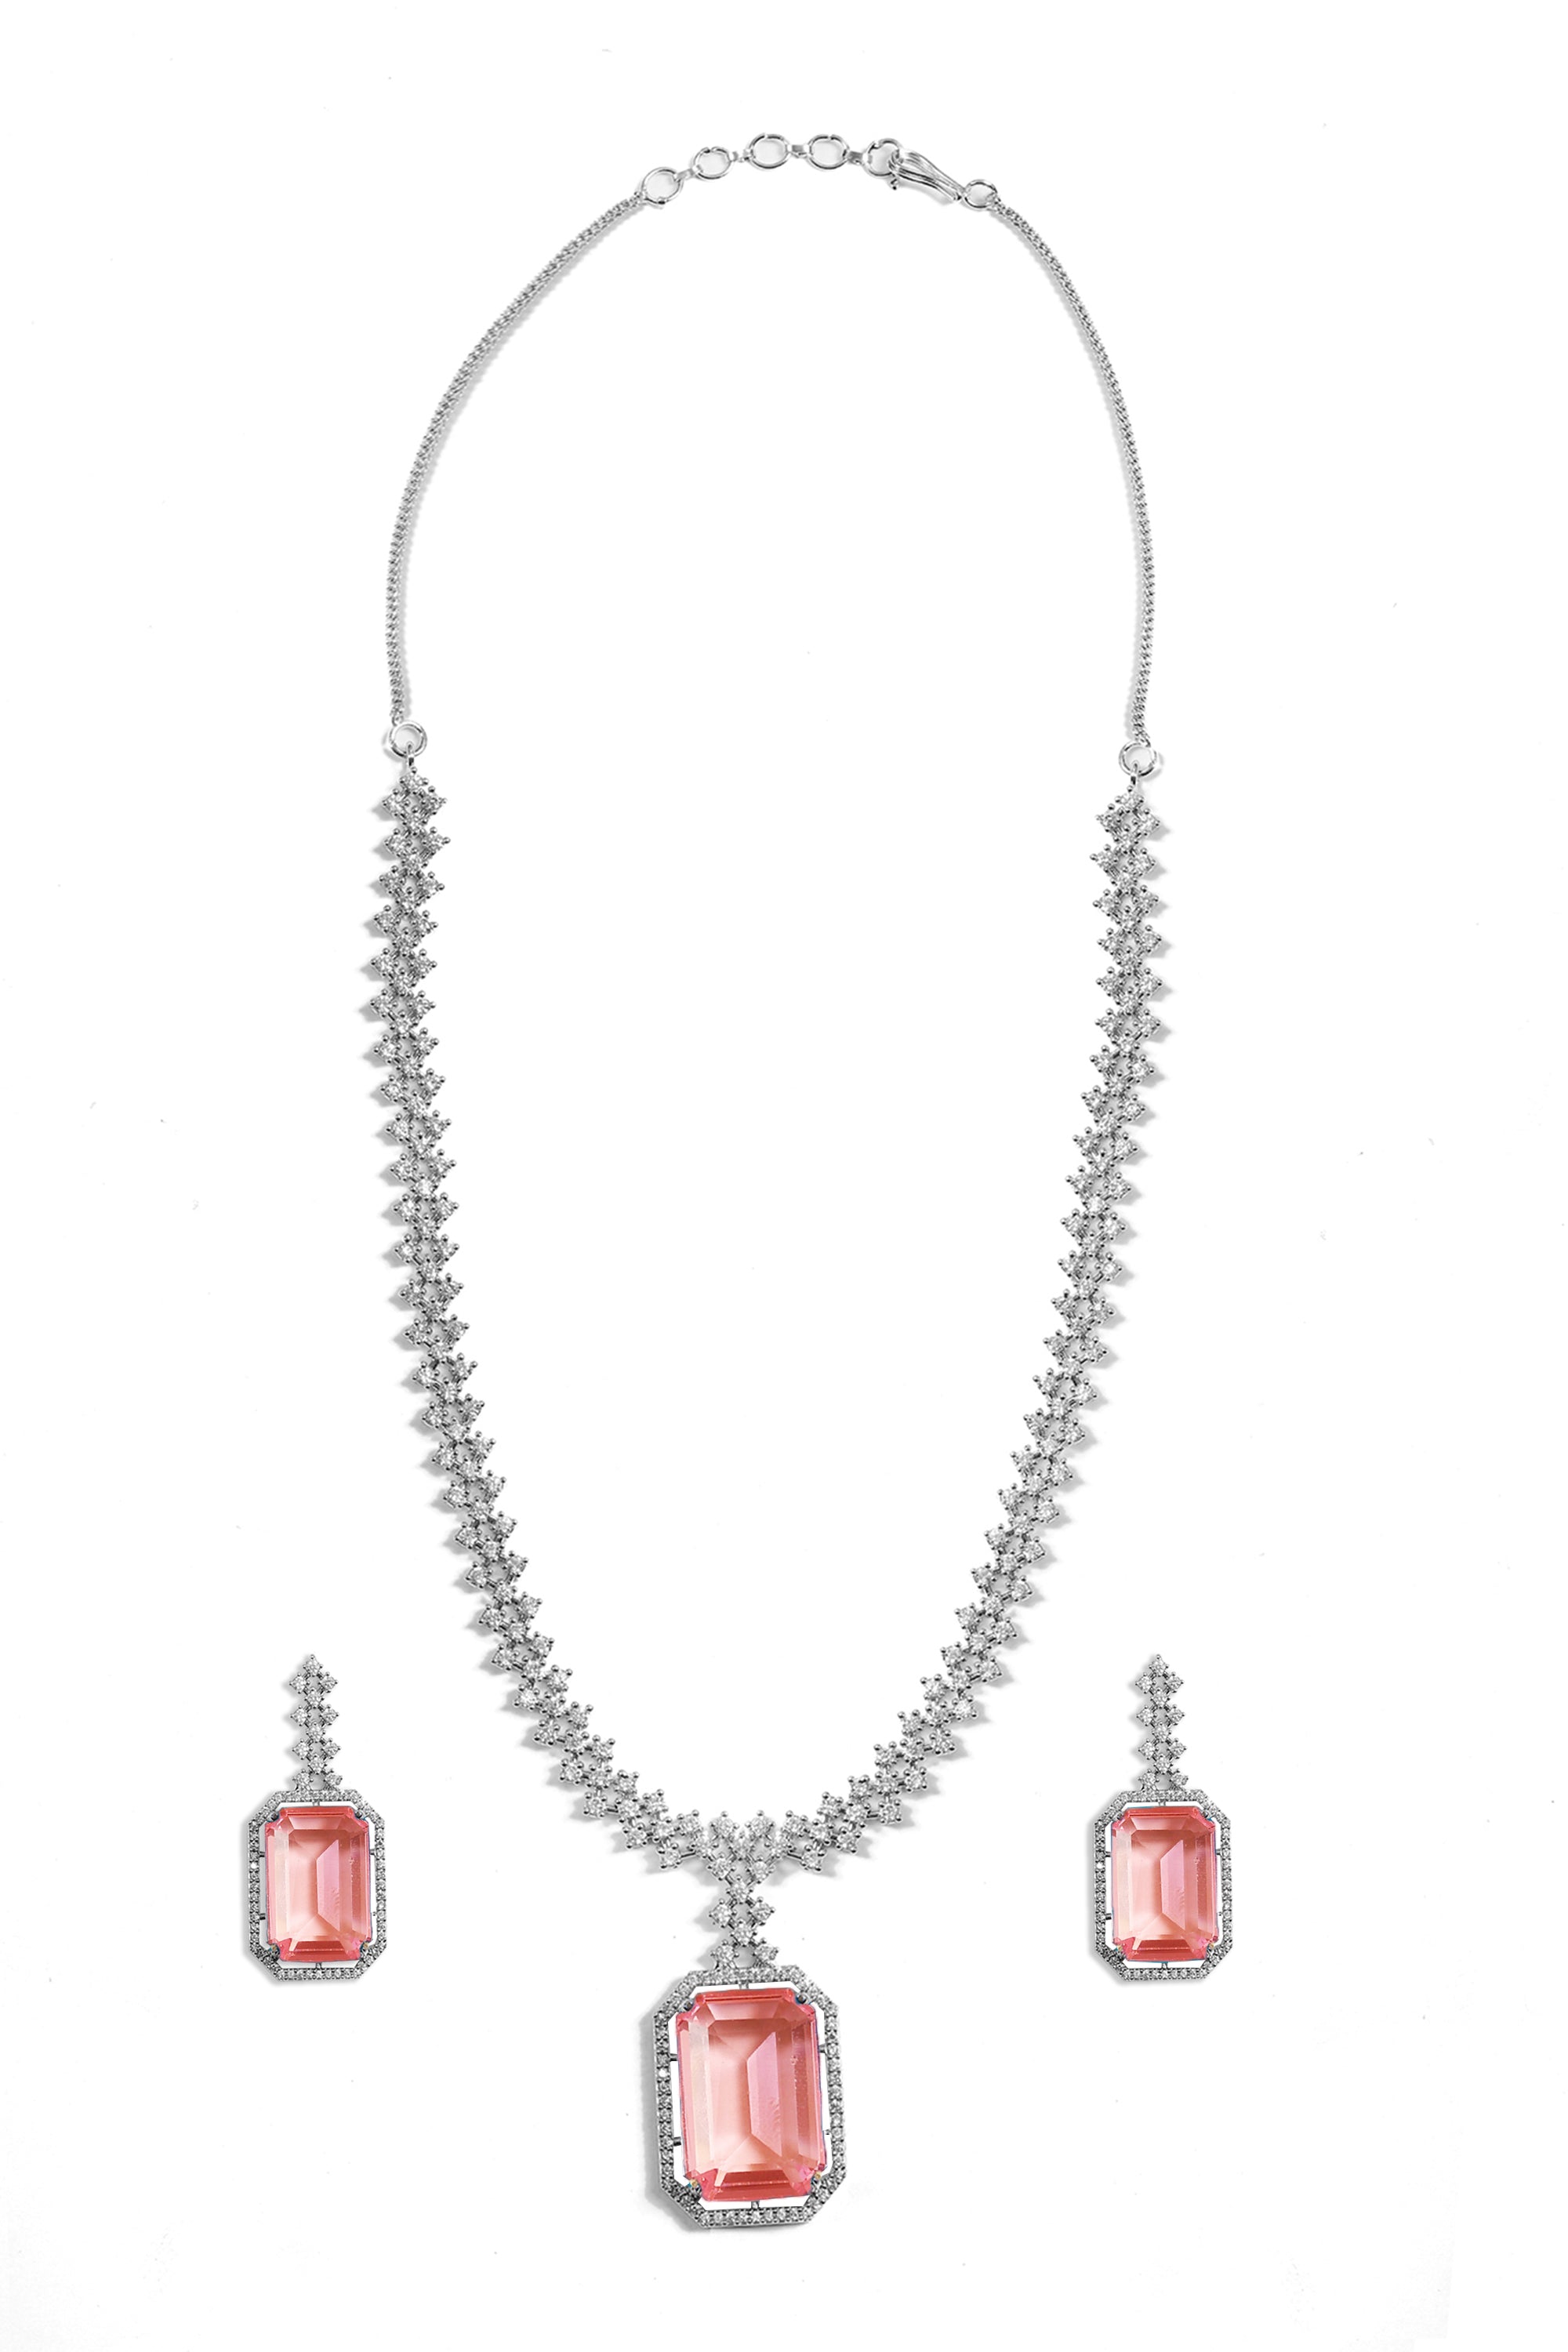 Silver Plated Pink Crystal Zirconia Studded Statement Necklace Set